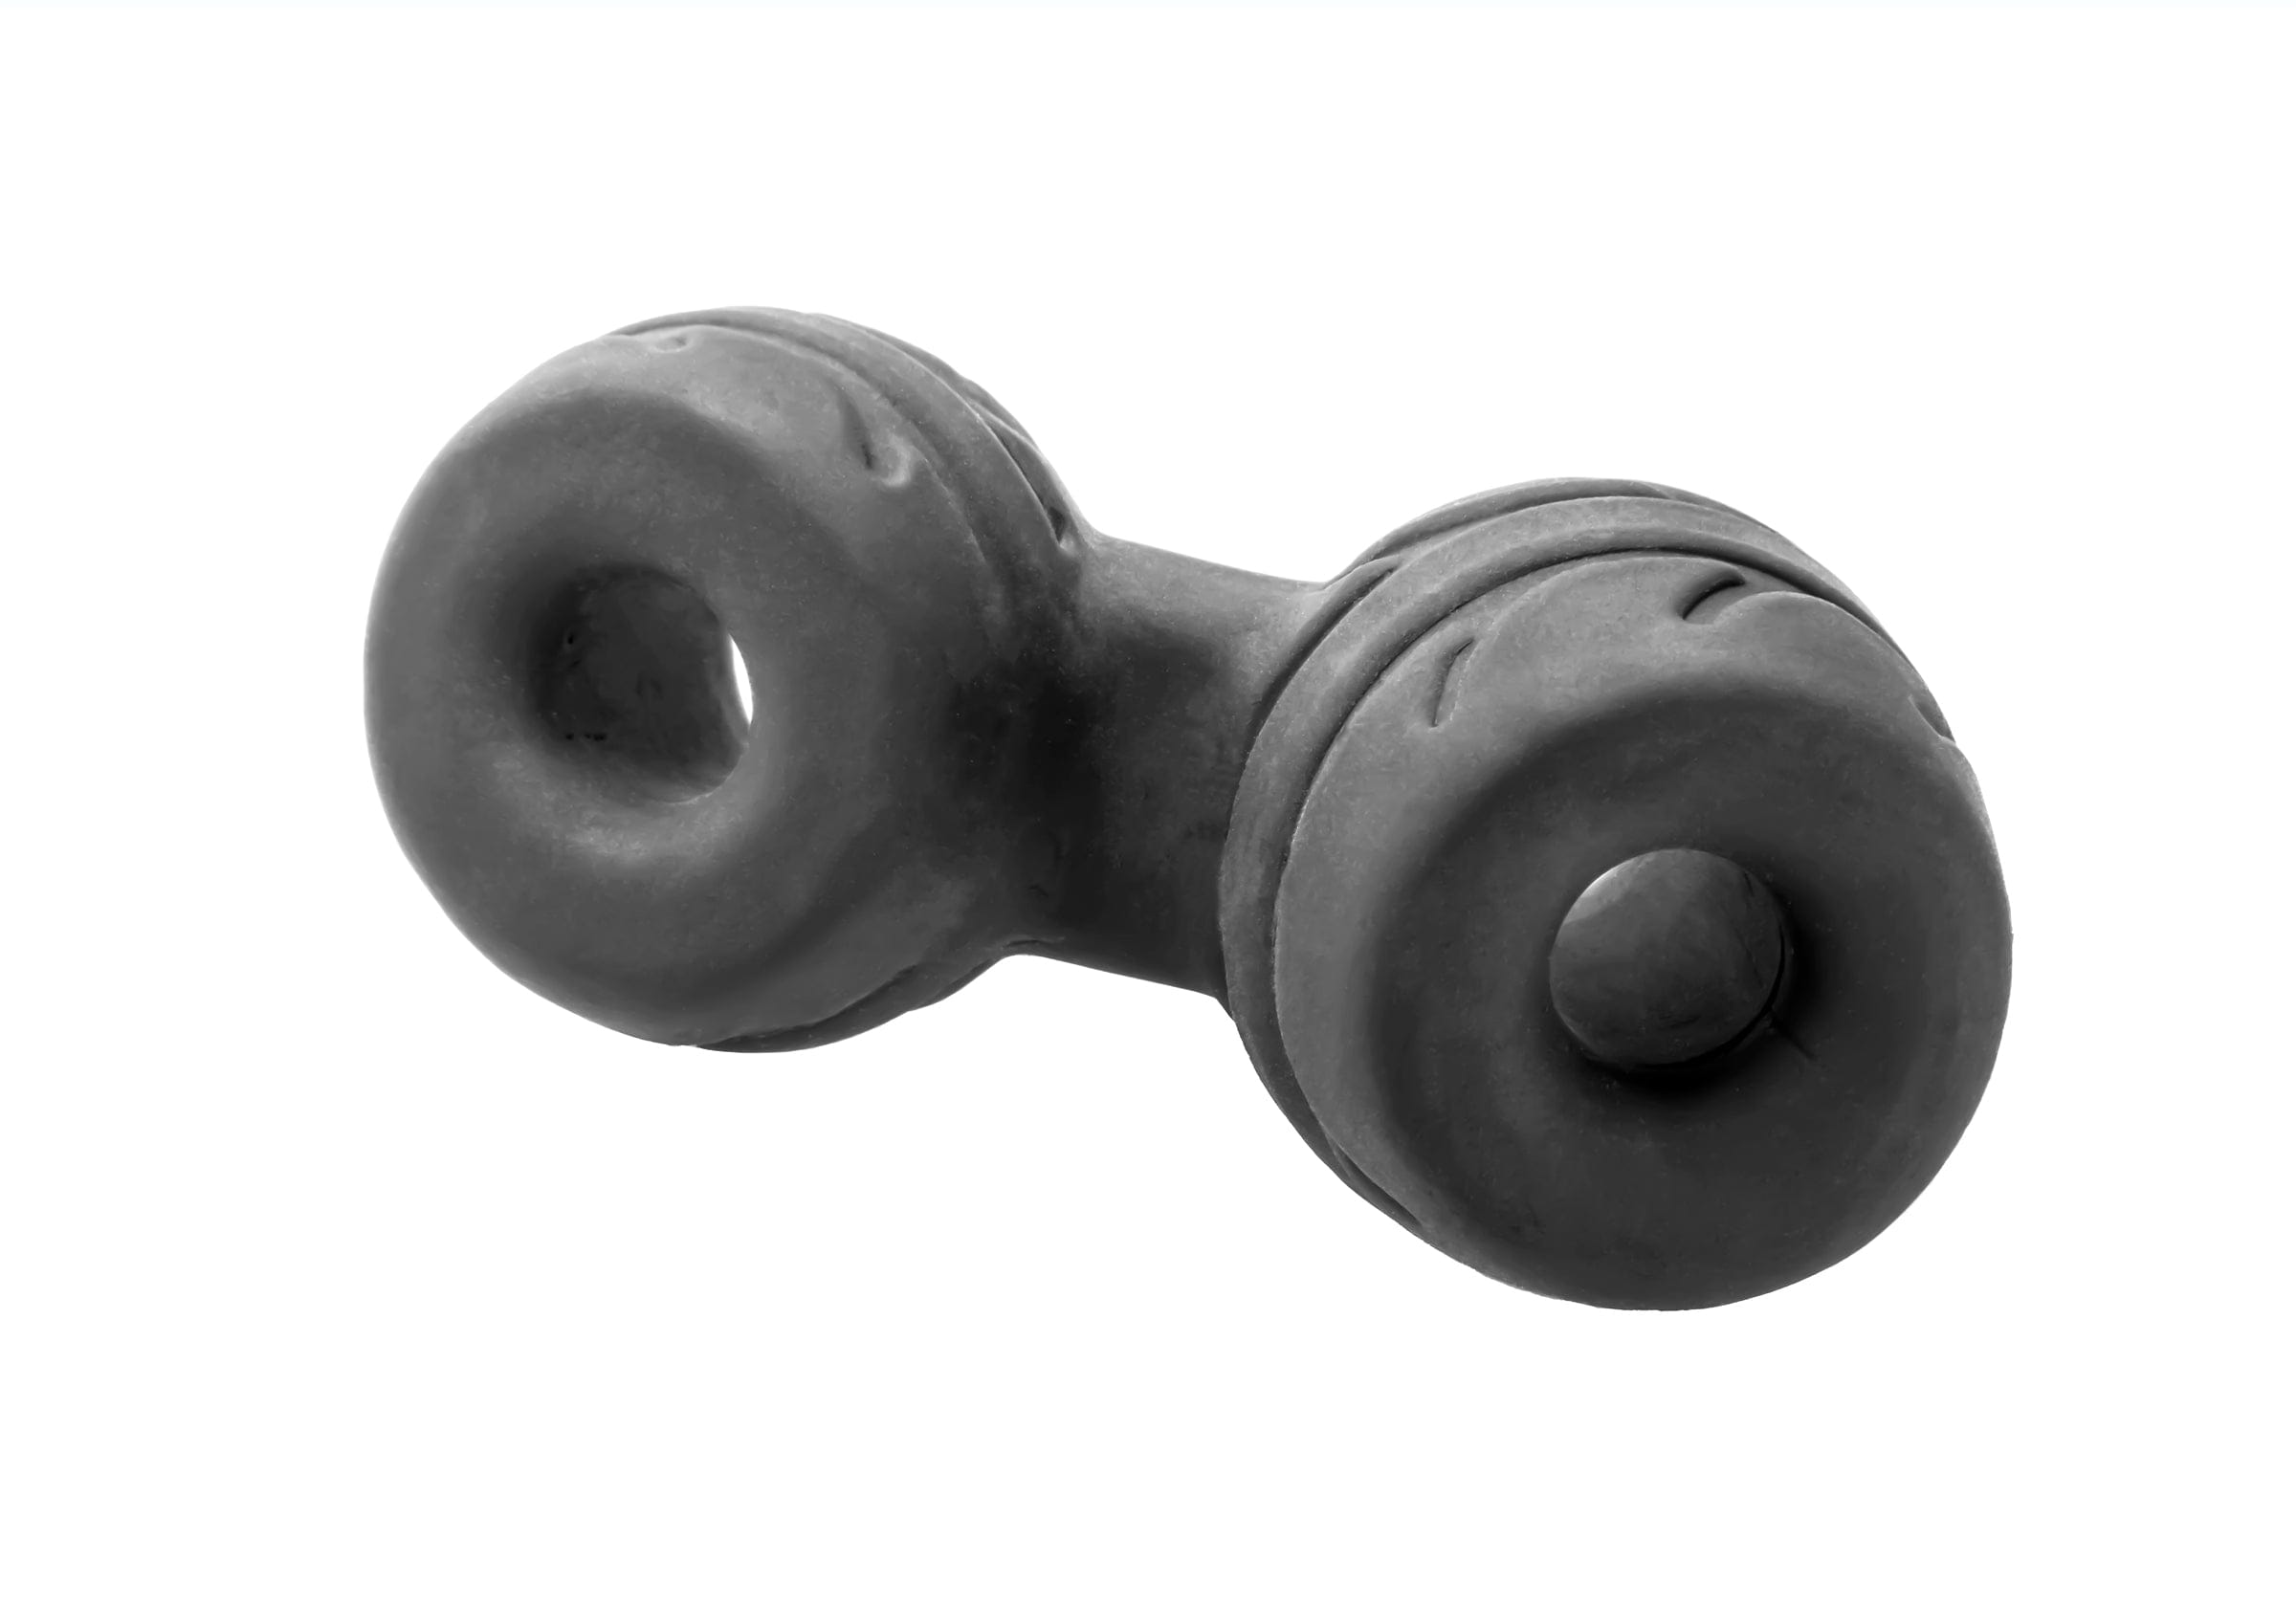 PerfectFit Adult Toys Black SilaSkin Cock And Ball Black 854854005892